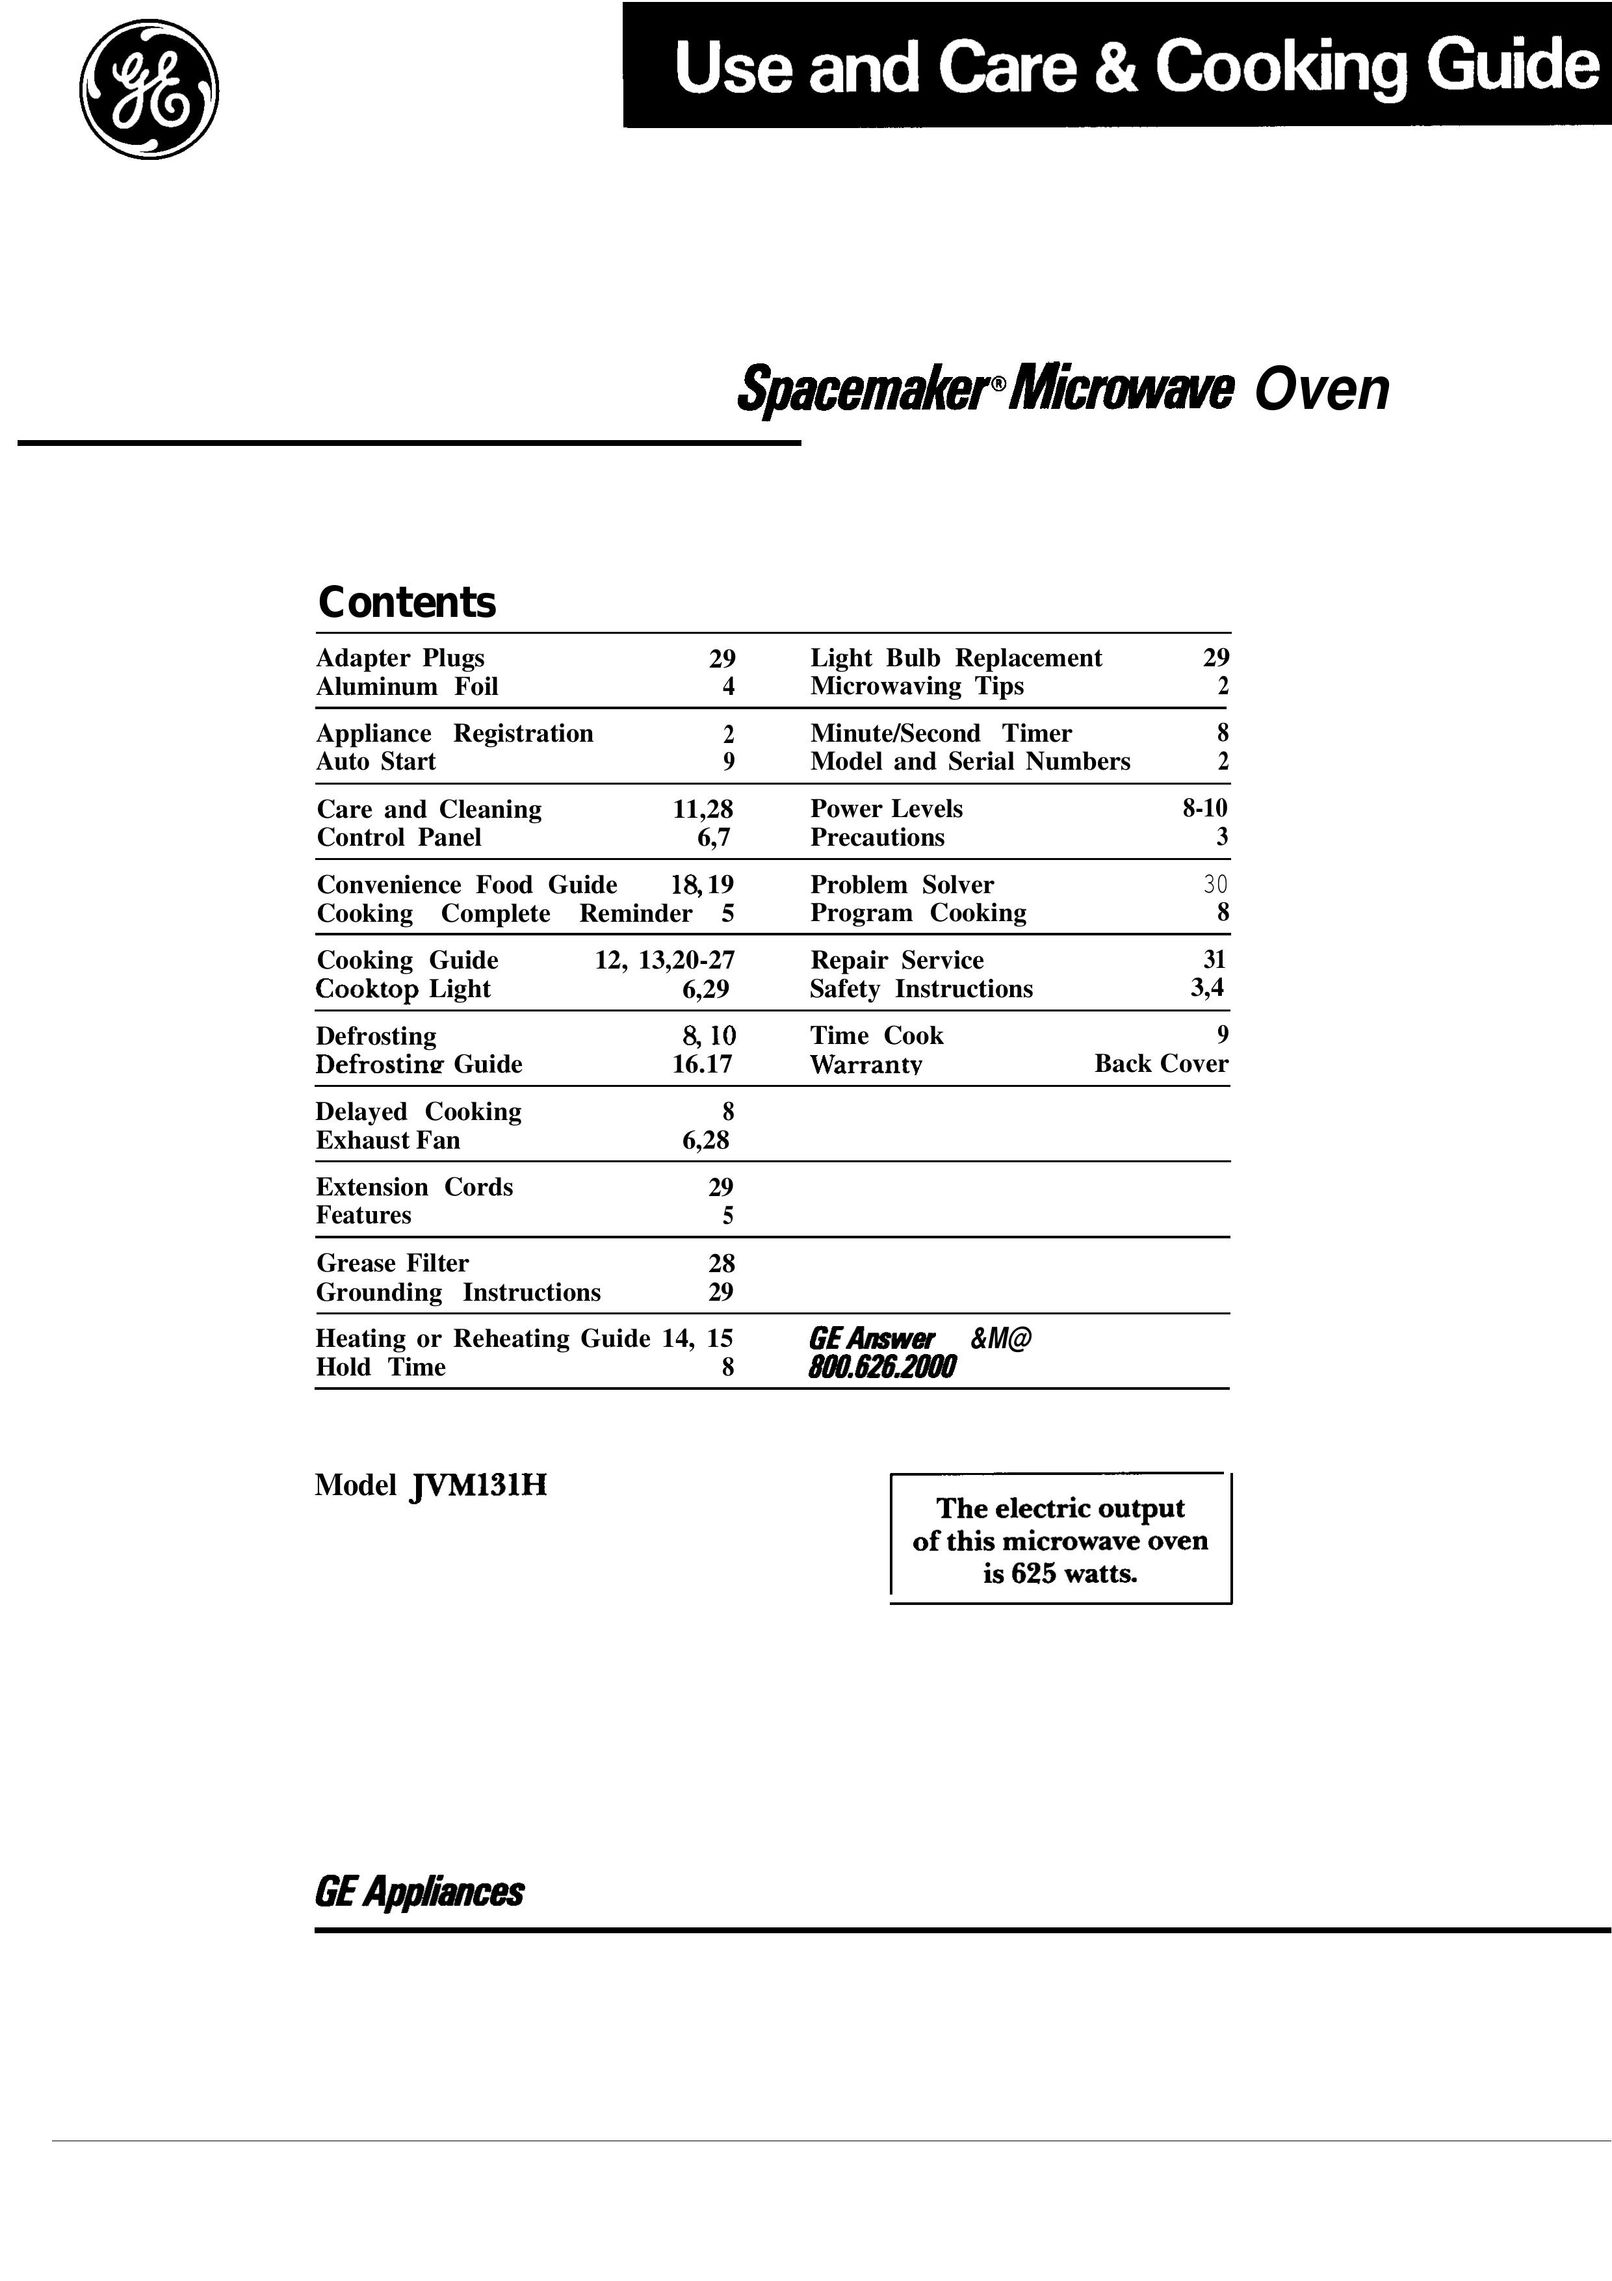 GE 164D2092P020 Microwave Oven User Manual